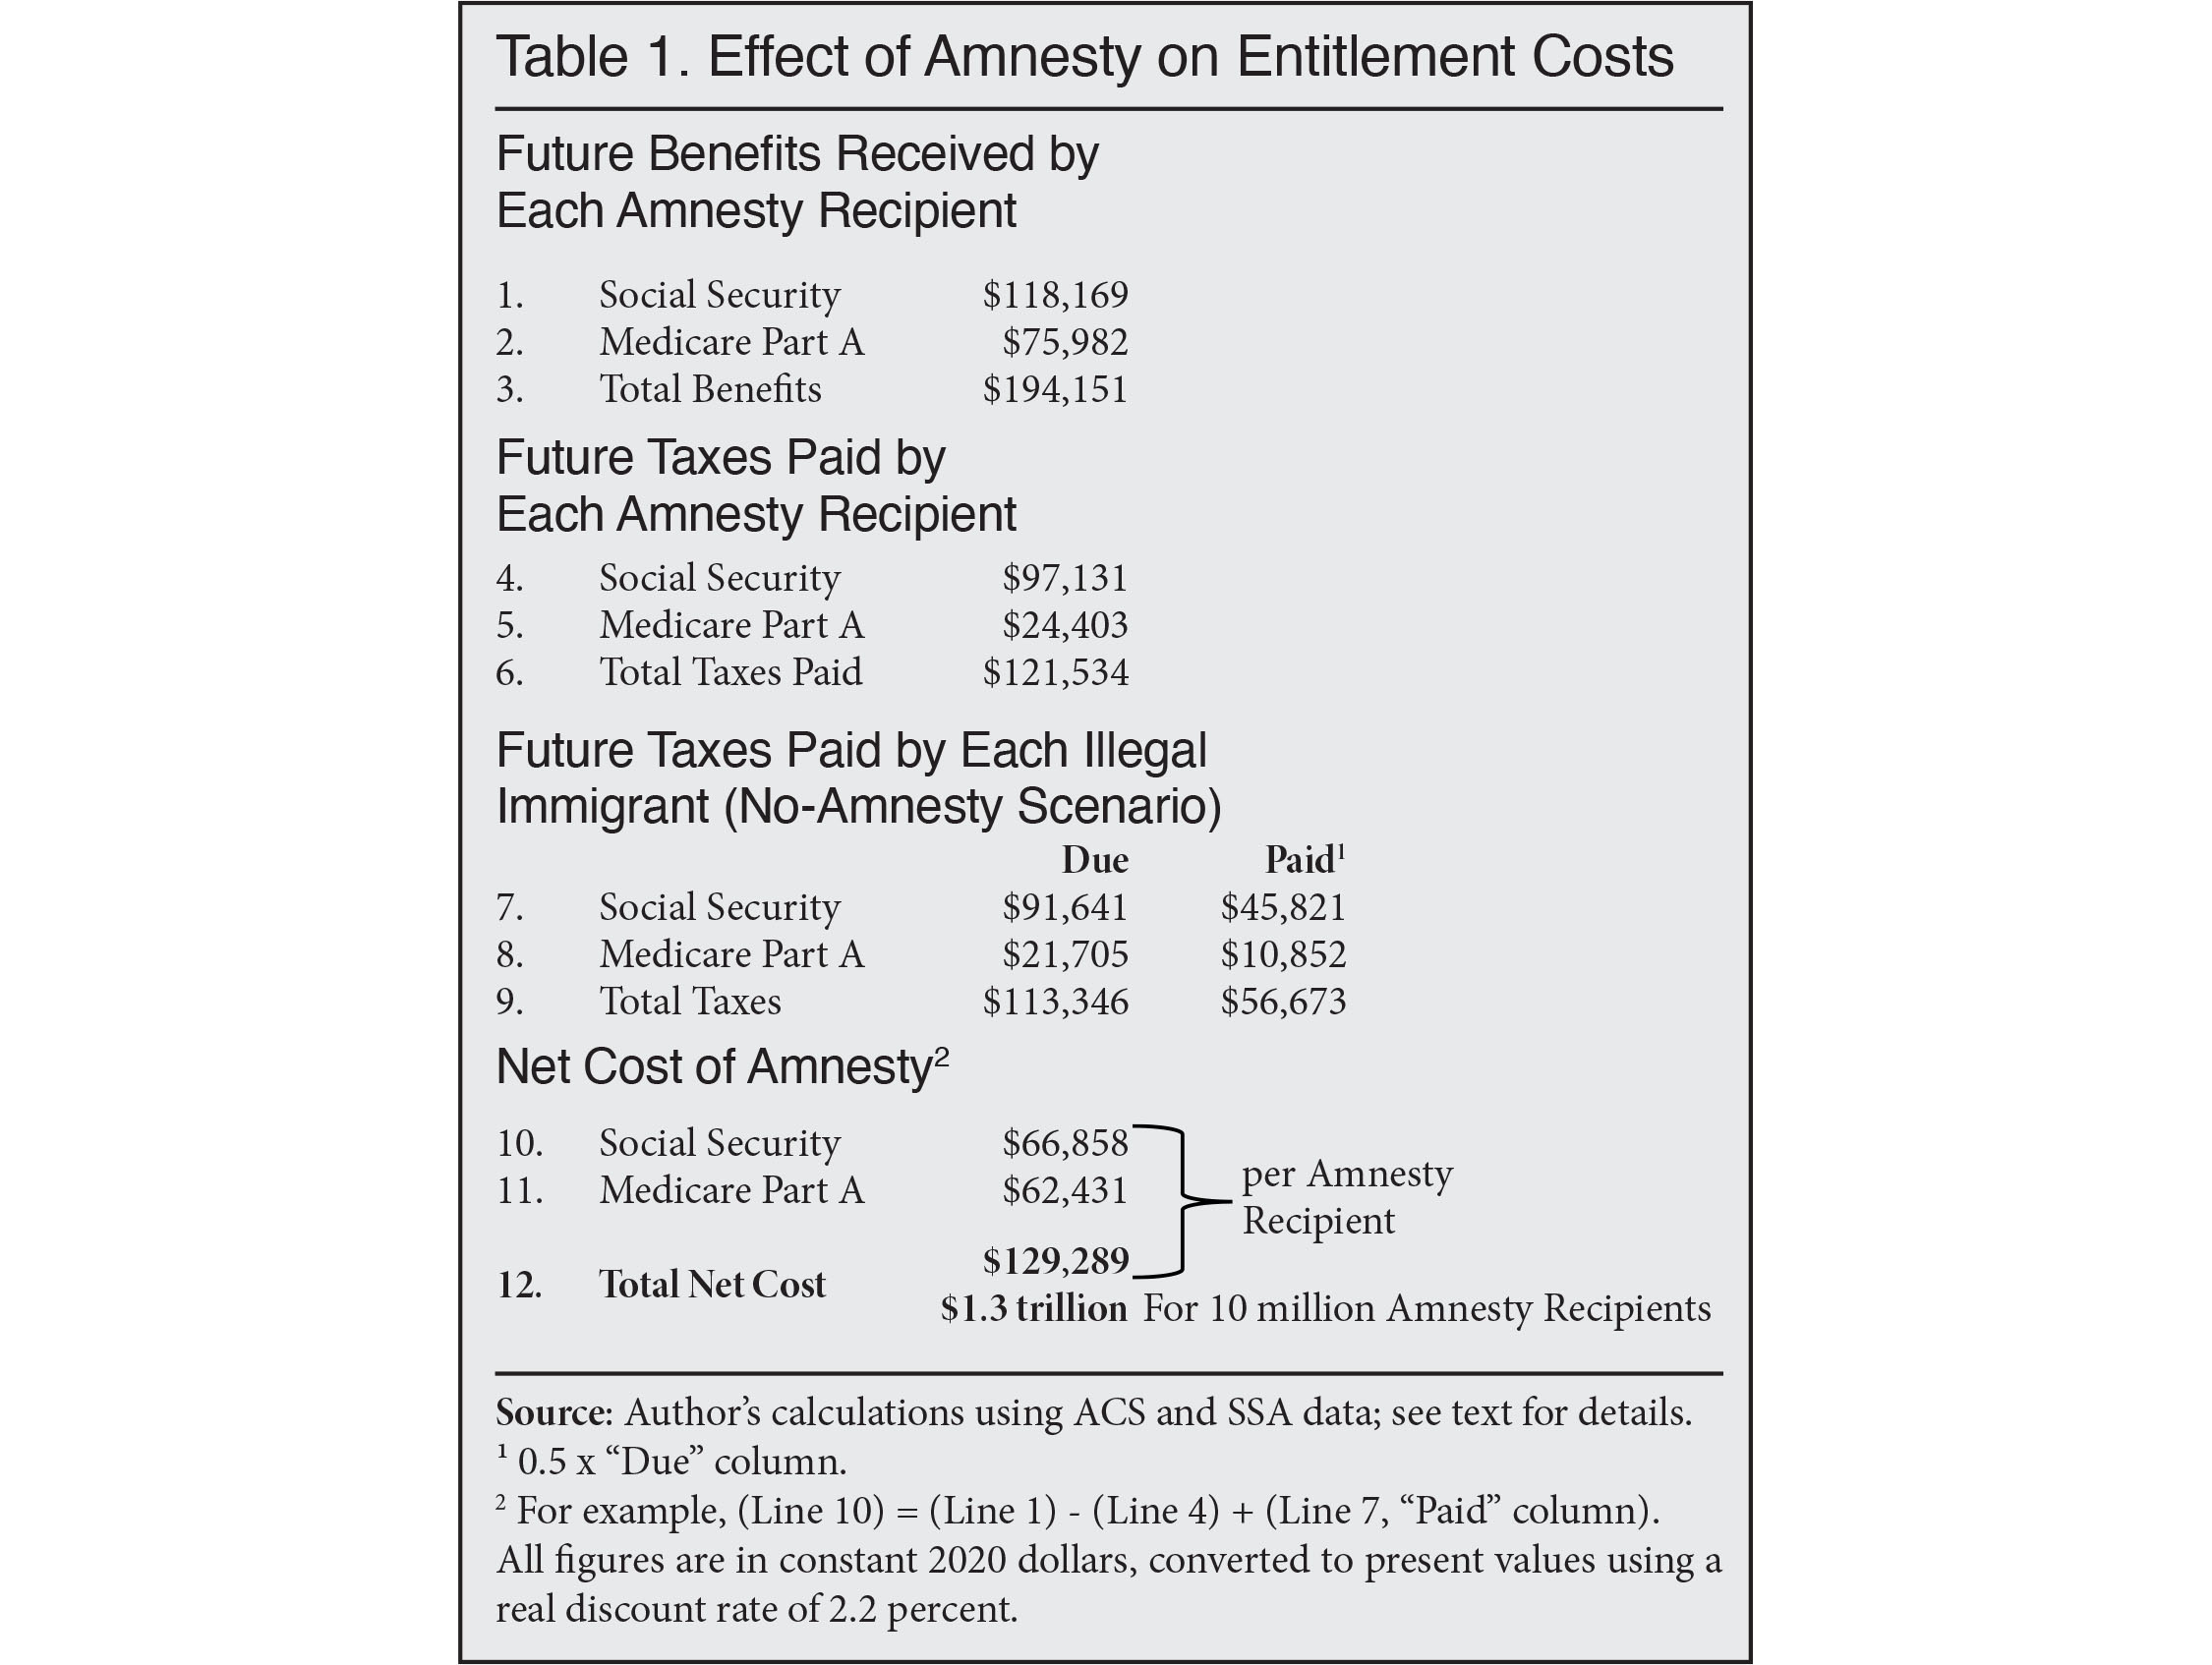 Table: Effect of Amnesty on Entitlement Costs